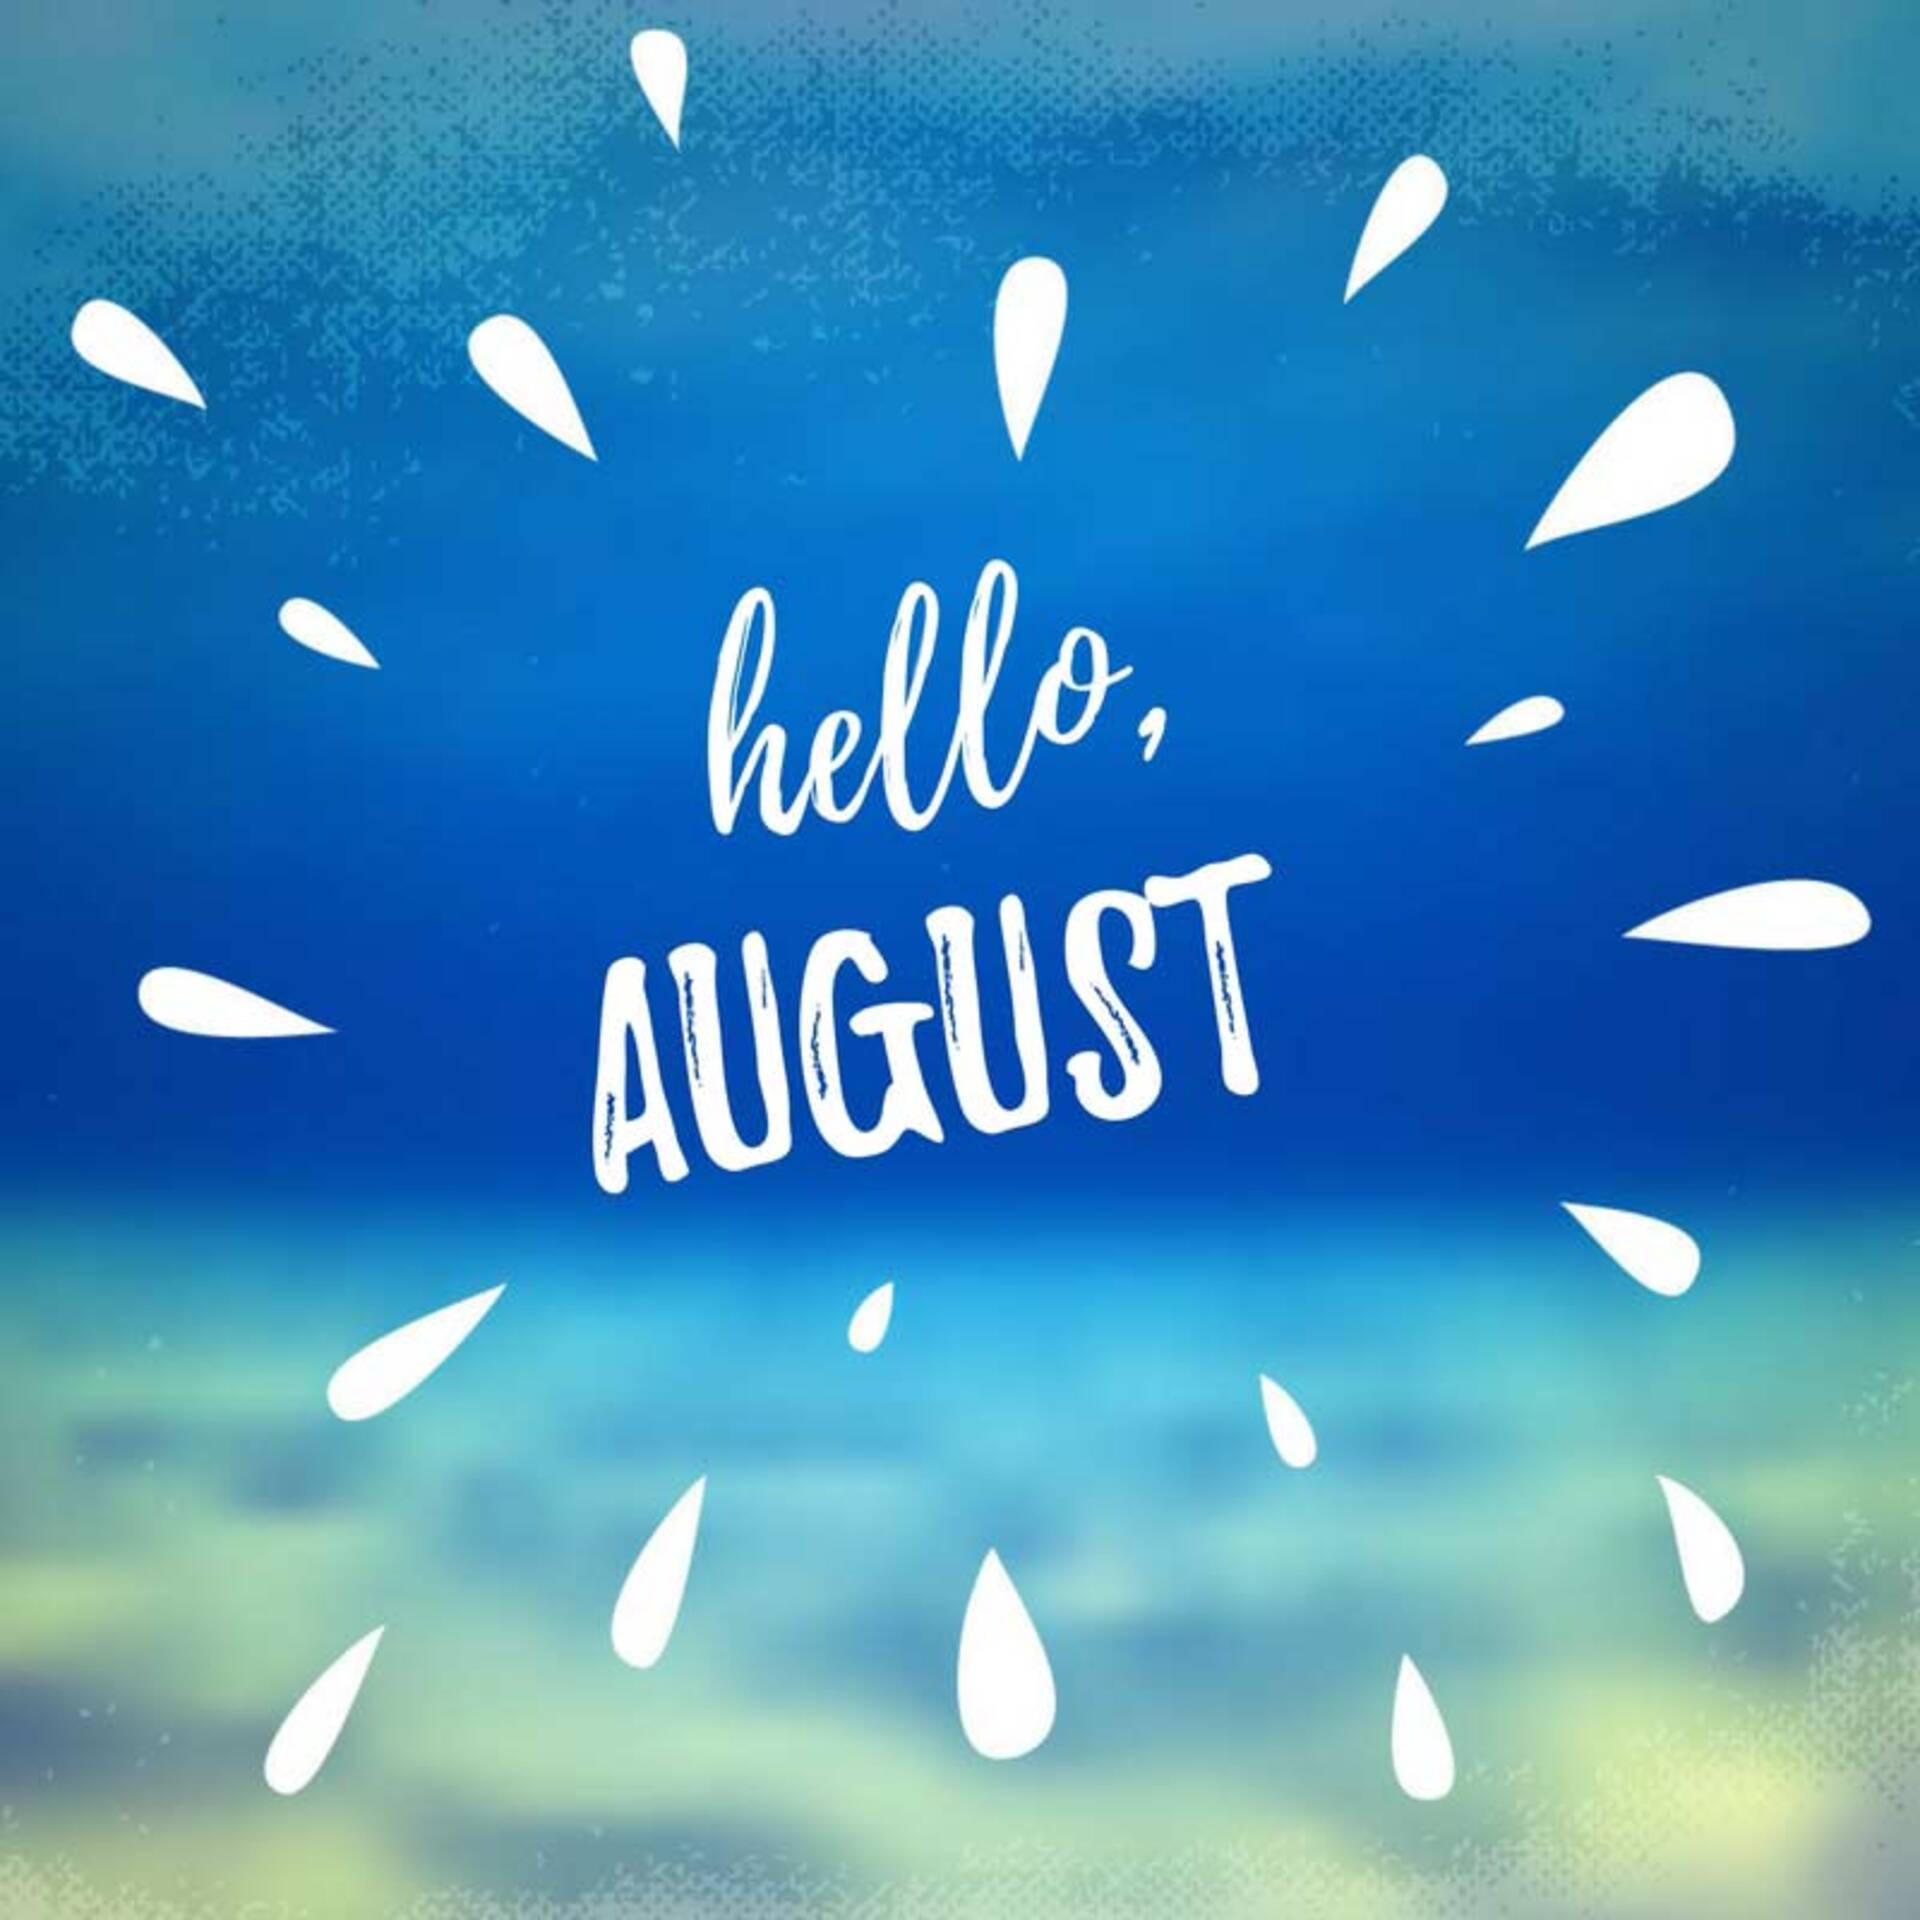 Warm Greetings For August!